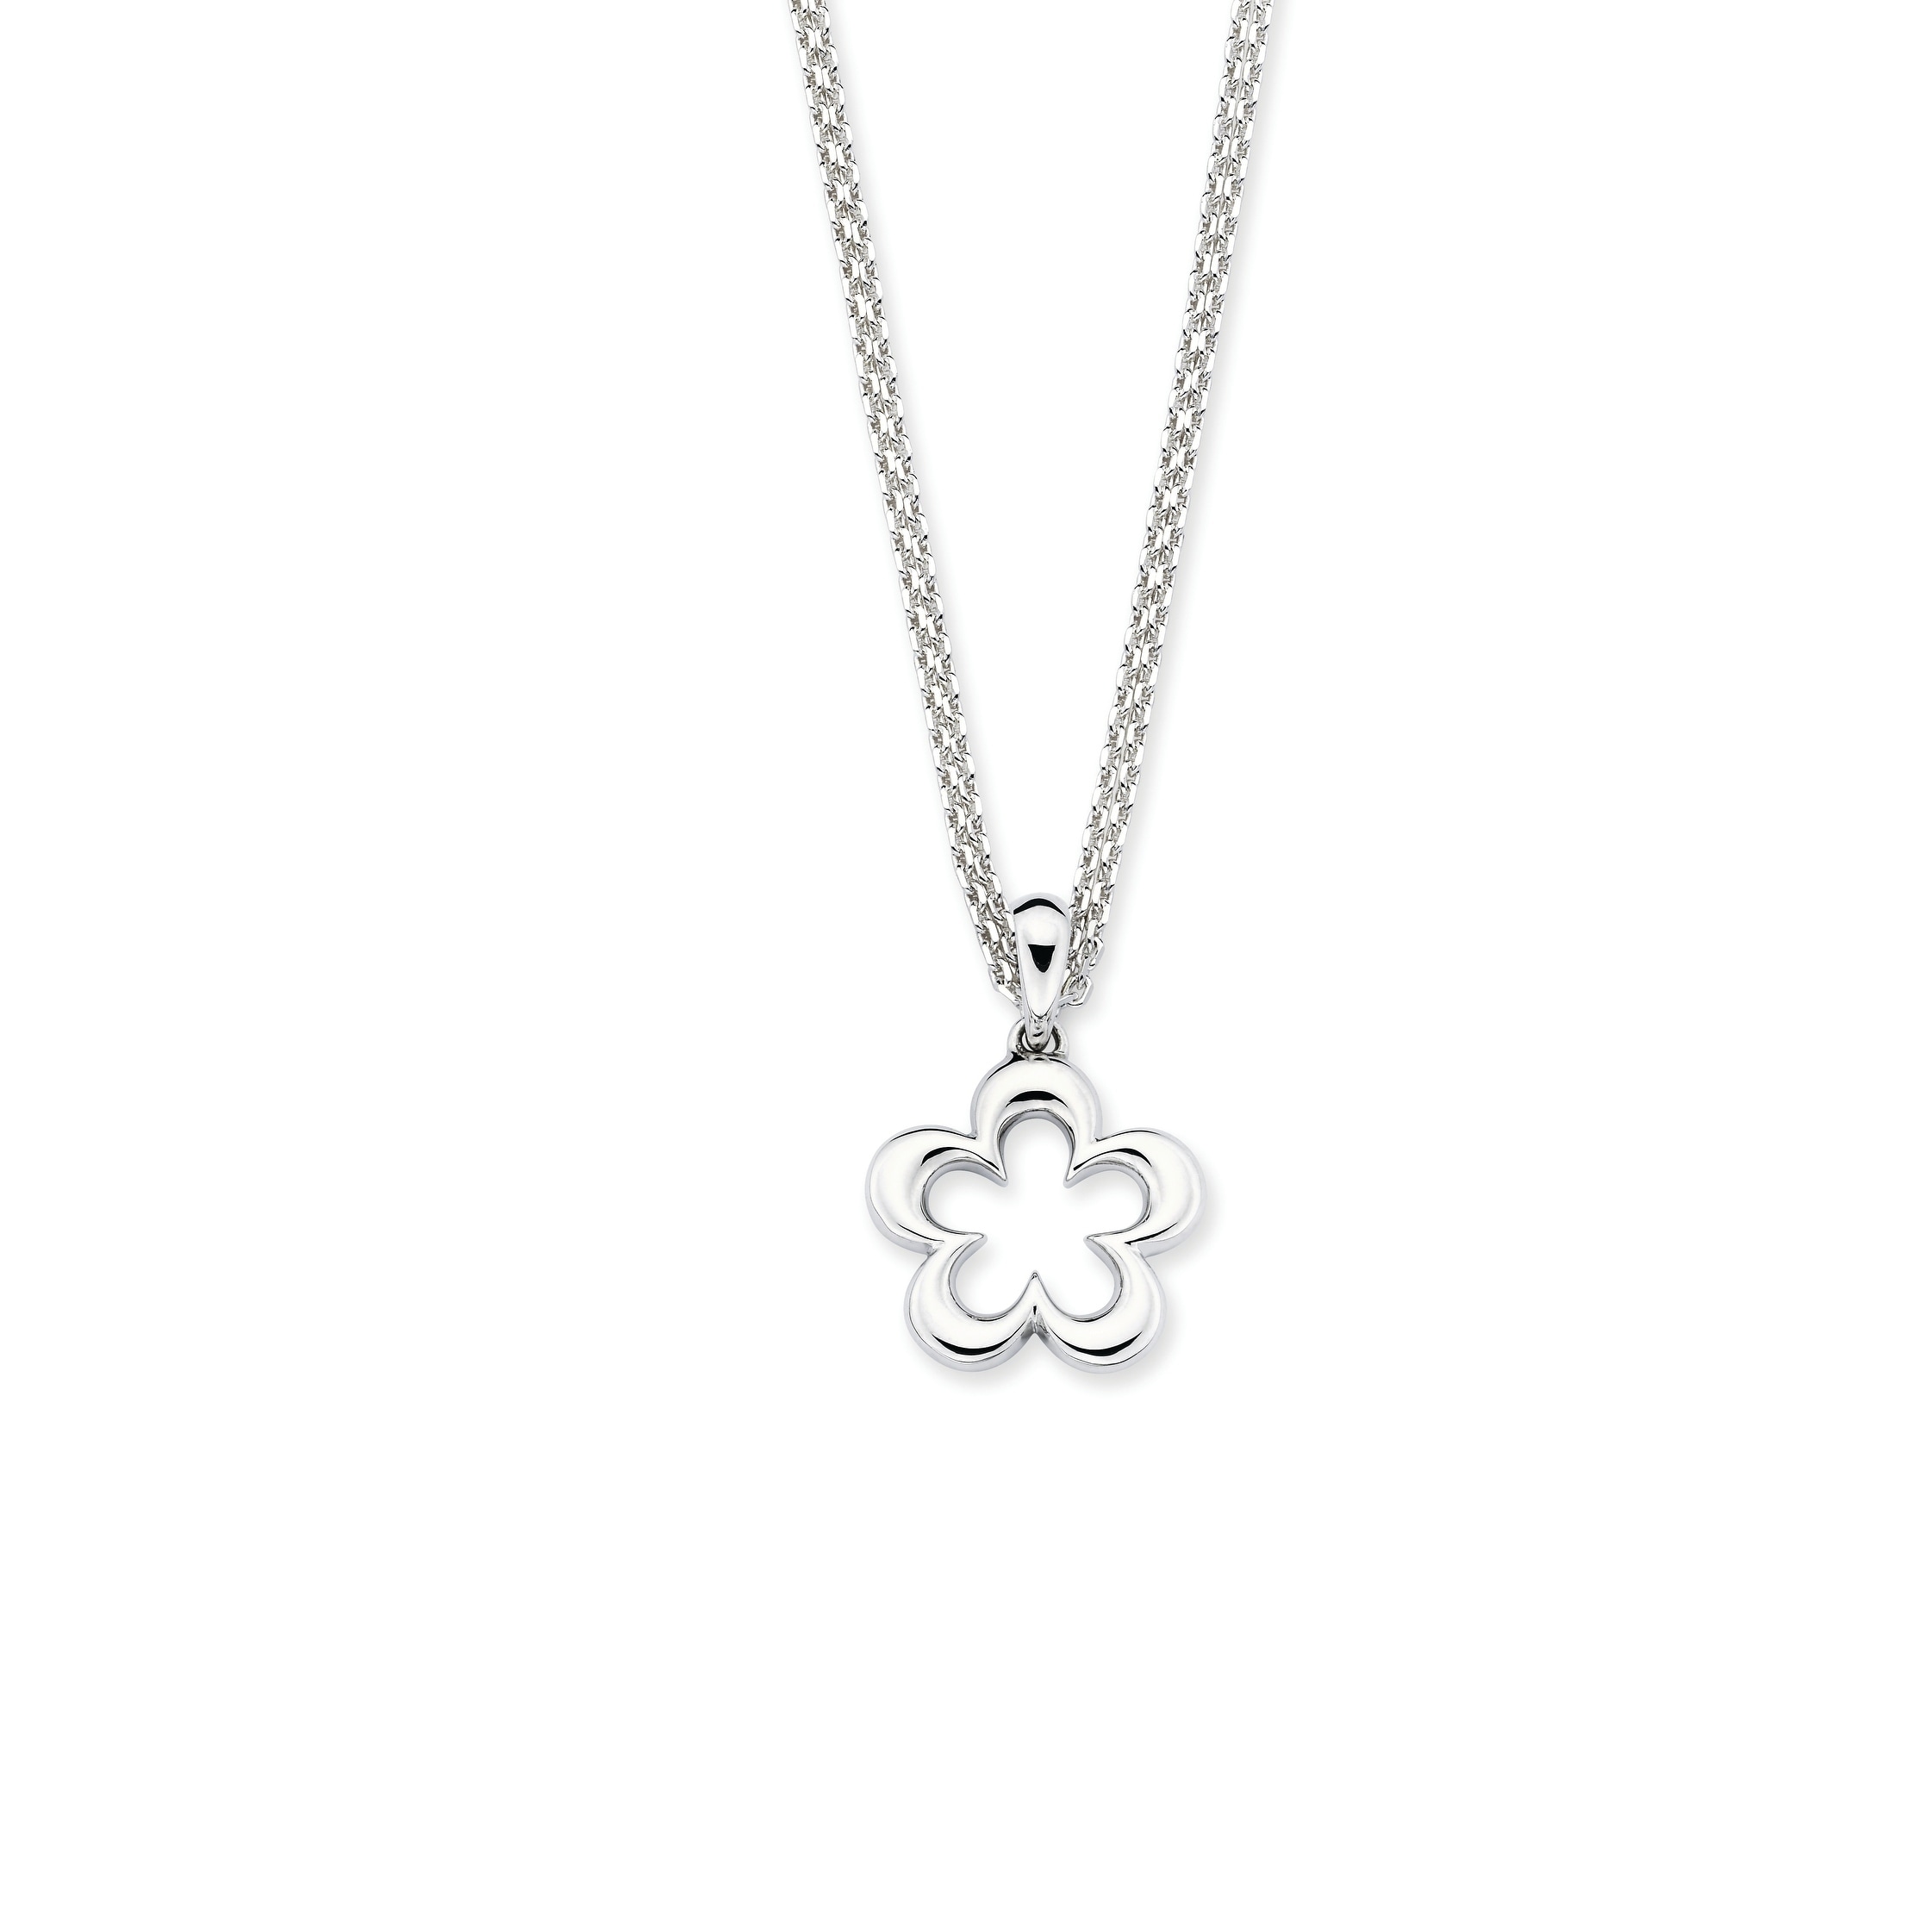 necklace with a charm